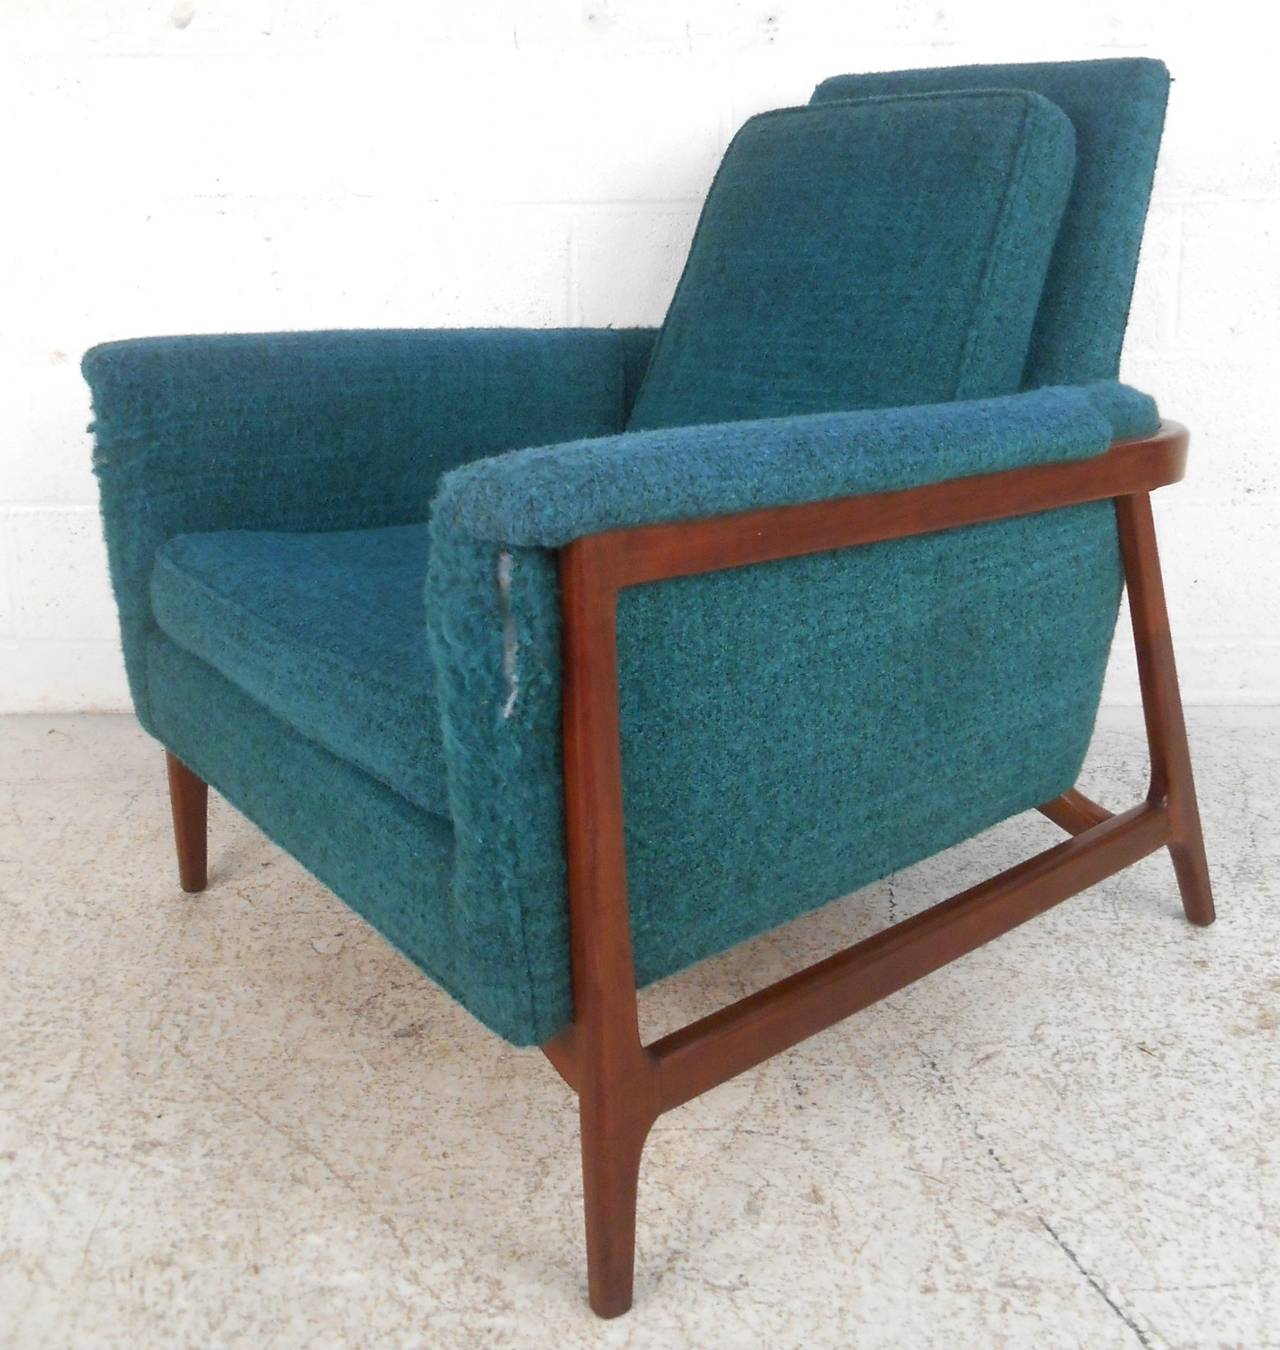 This unique vintage armchair features a truly unique wooden frame, molded armrests, and comfortable high back design. Wonderful lines set apart this lounge chair from the rest and make it a perfect addition to home or business. Please confirm item